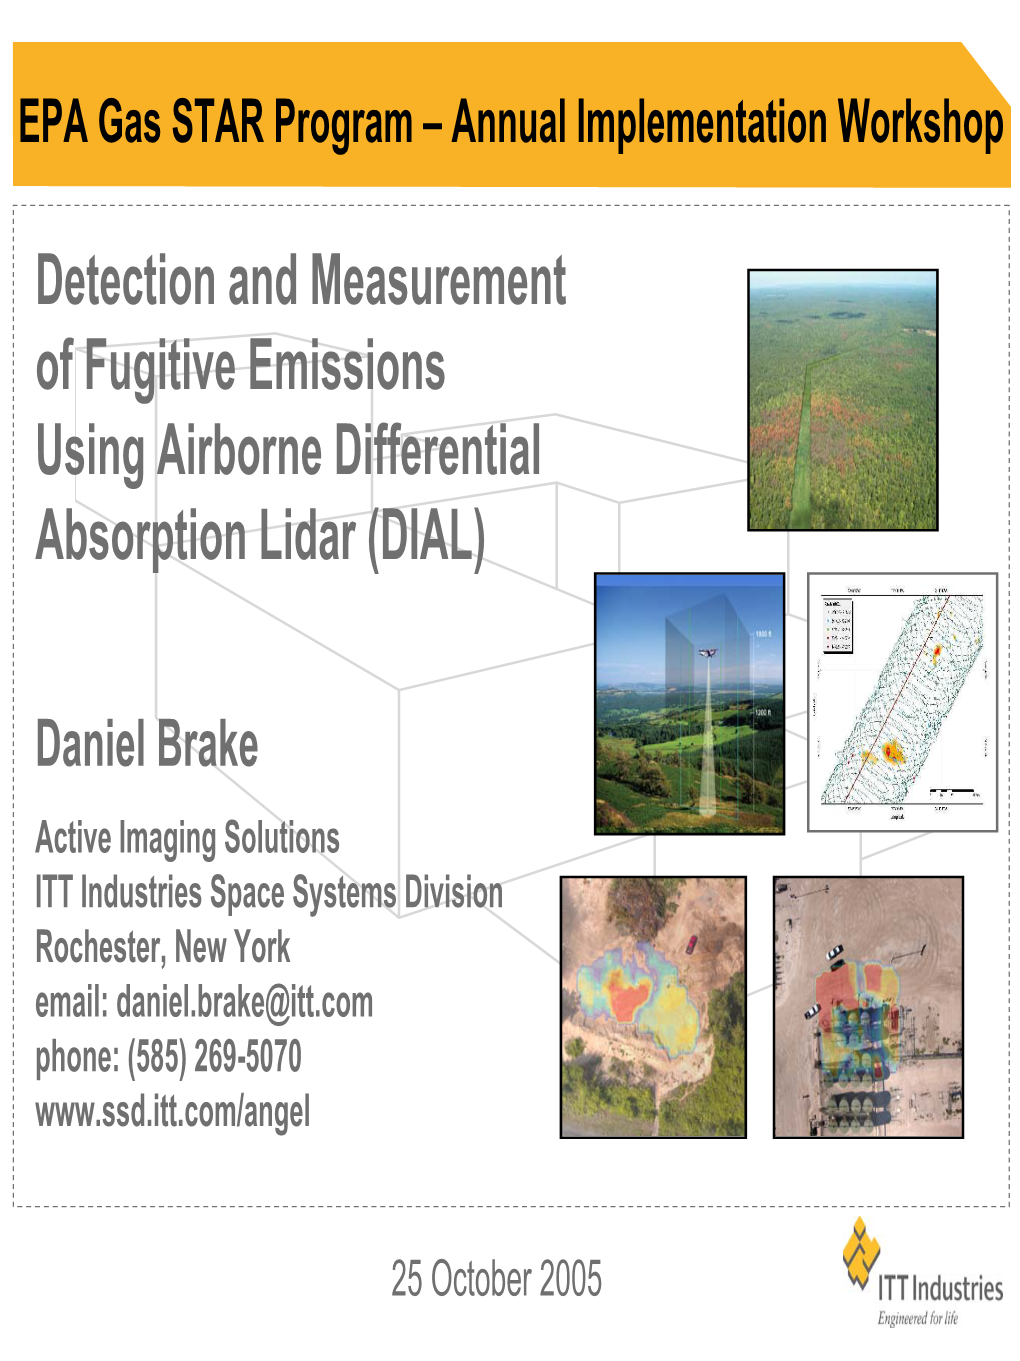 Detection and Measurement of Fugitive Emissions Using Airborne Differential Absorption Lidar (DIAL)